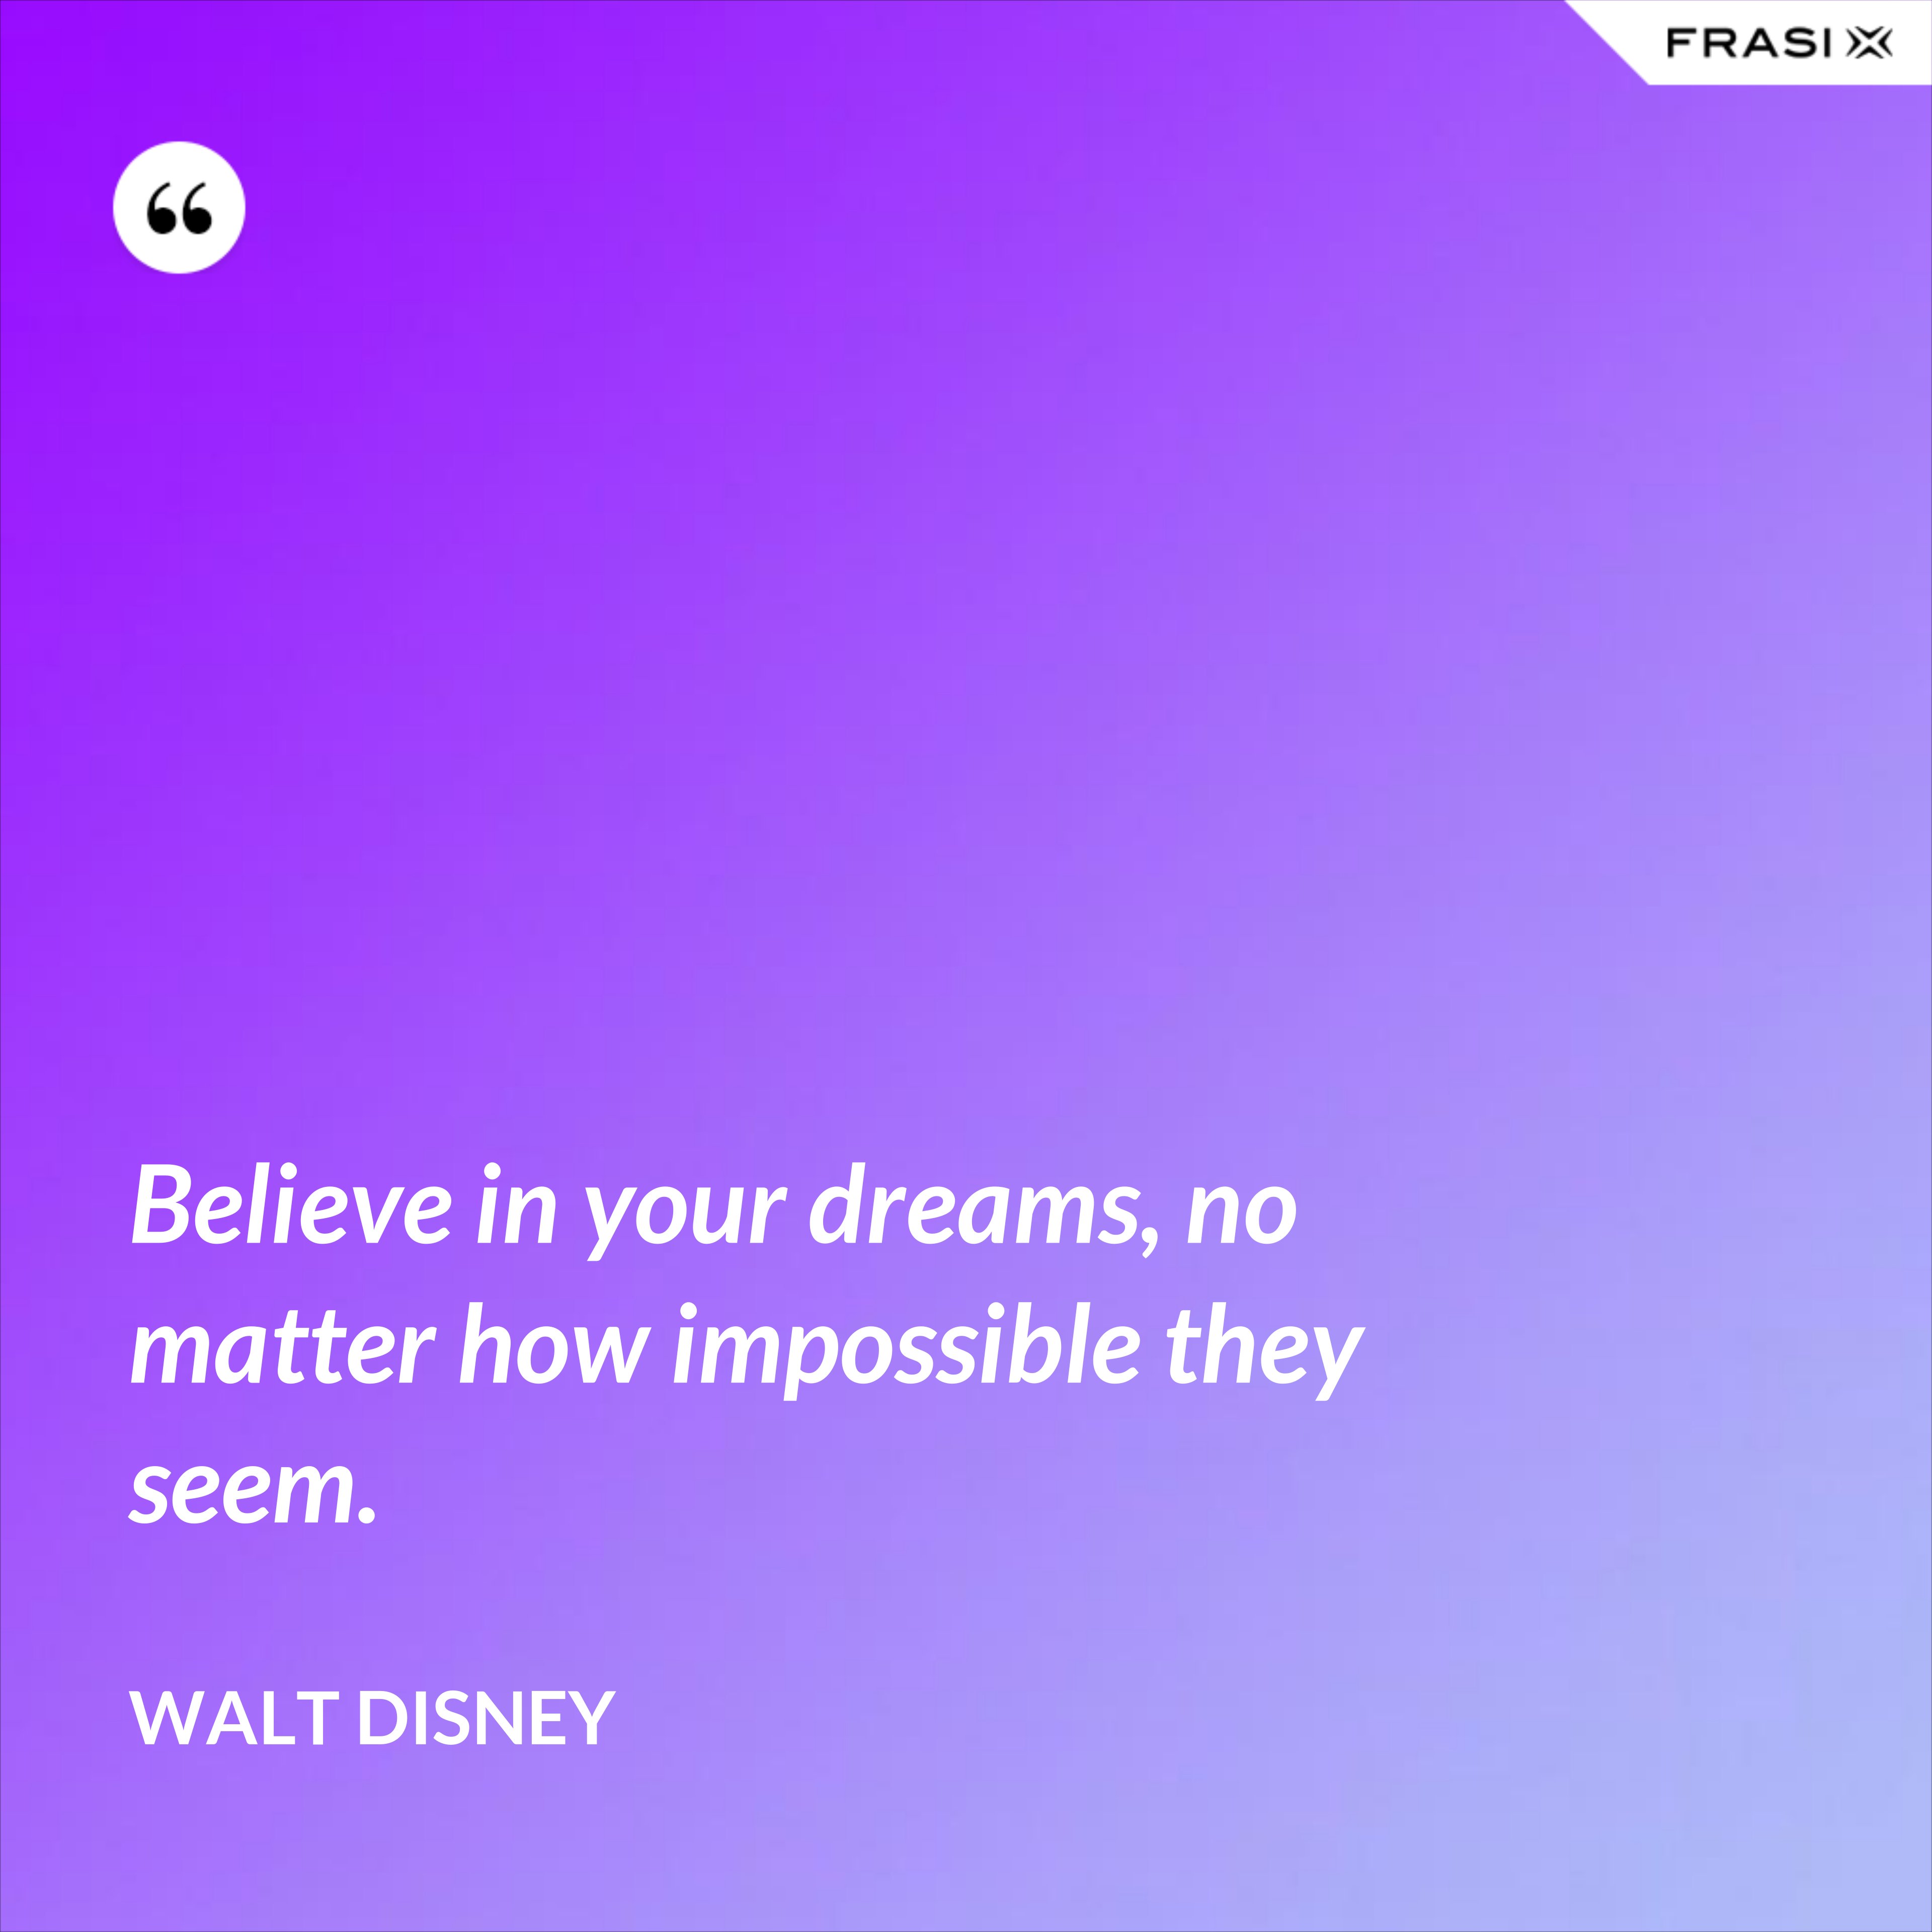 Believe in your dreams, no matter how impossible they seem. - Walt Disney